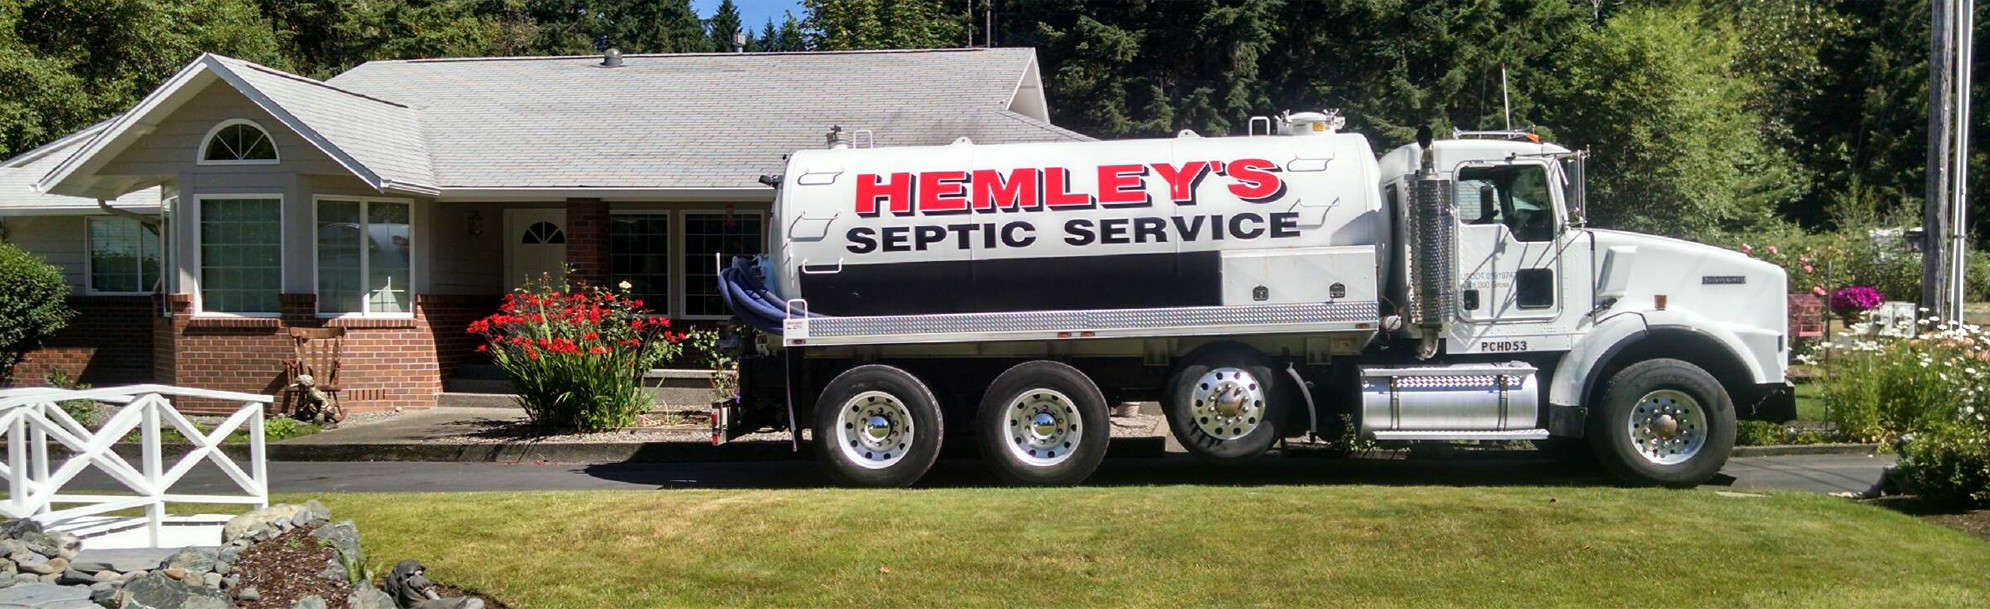 septic tank cleaning pierce county, kitsap county, thurston county